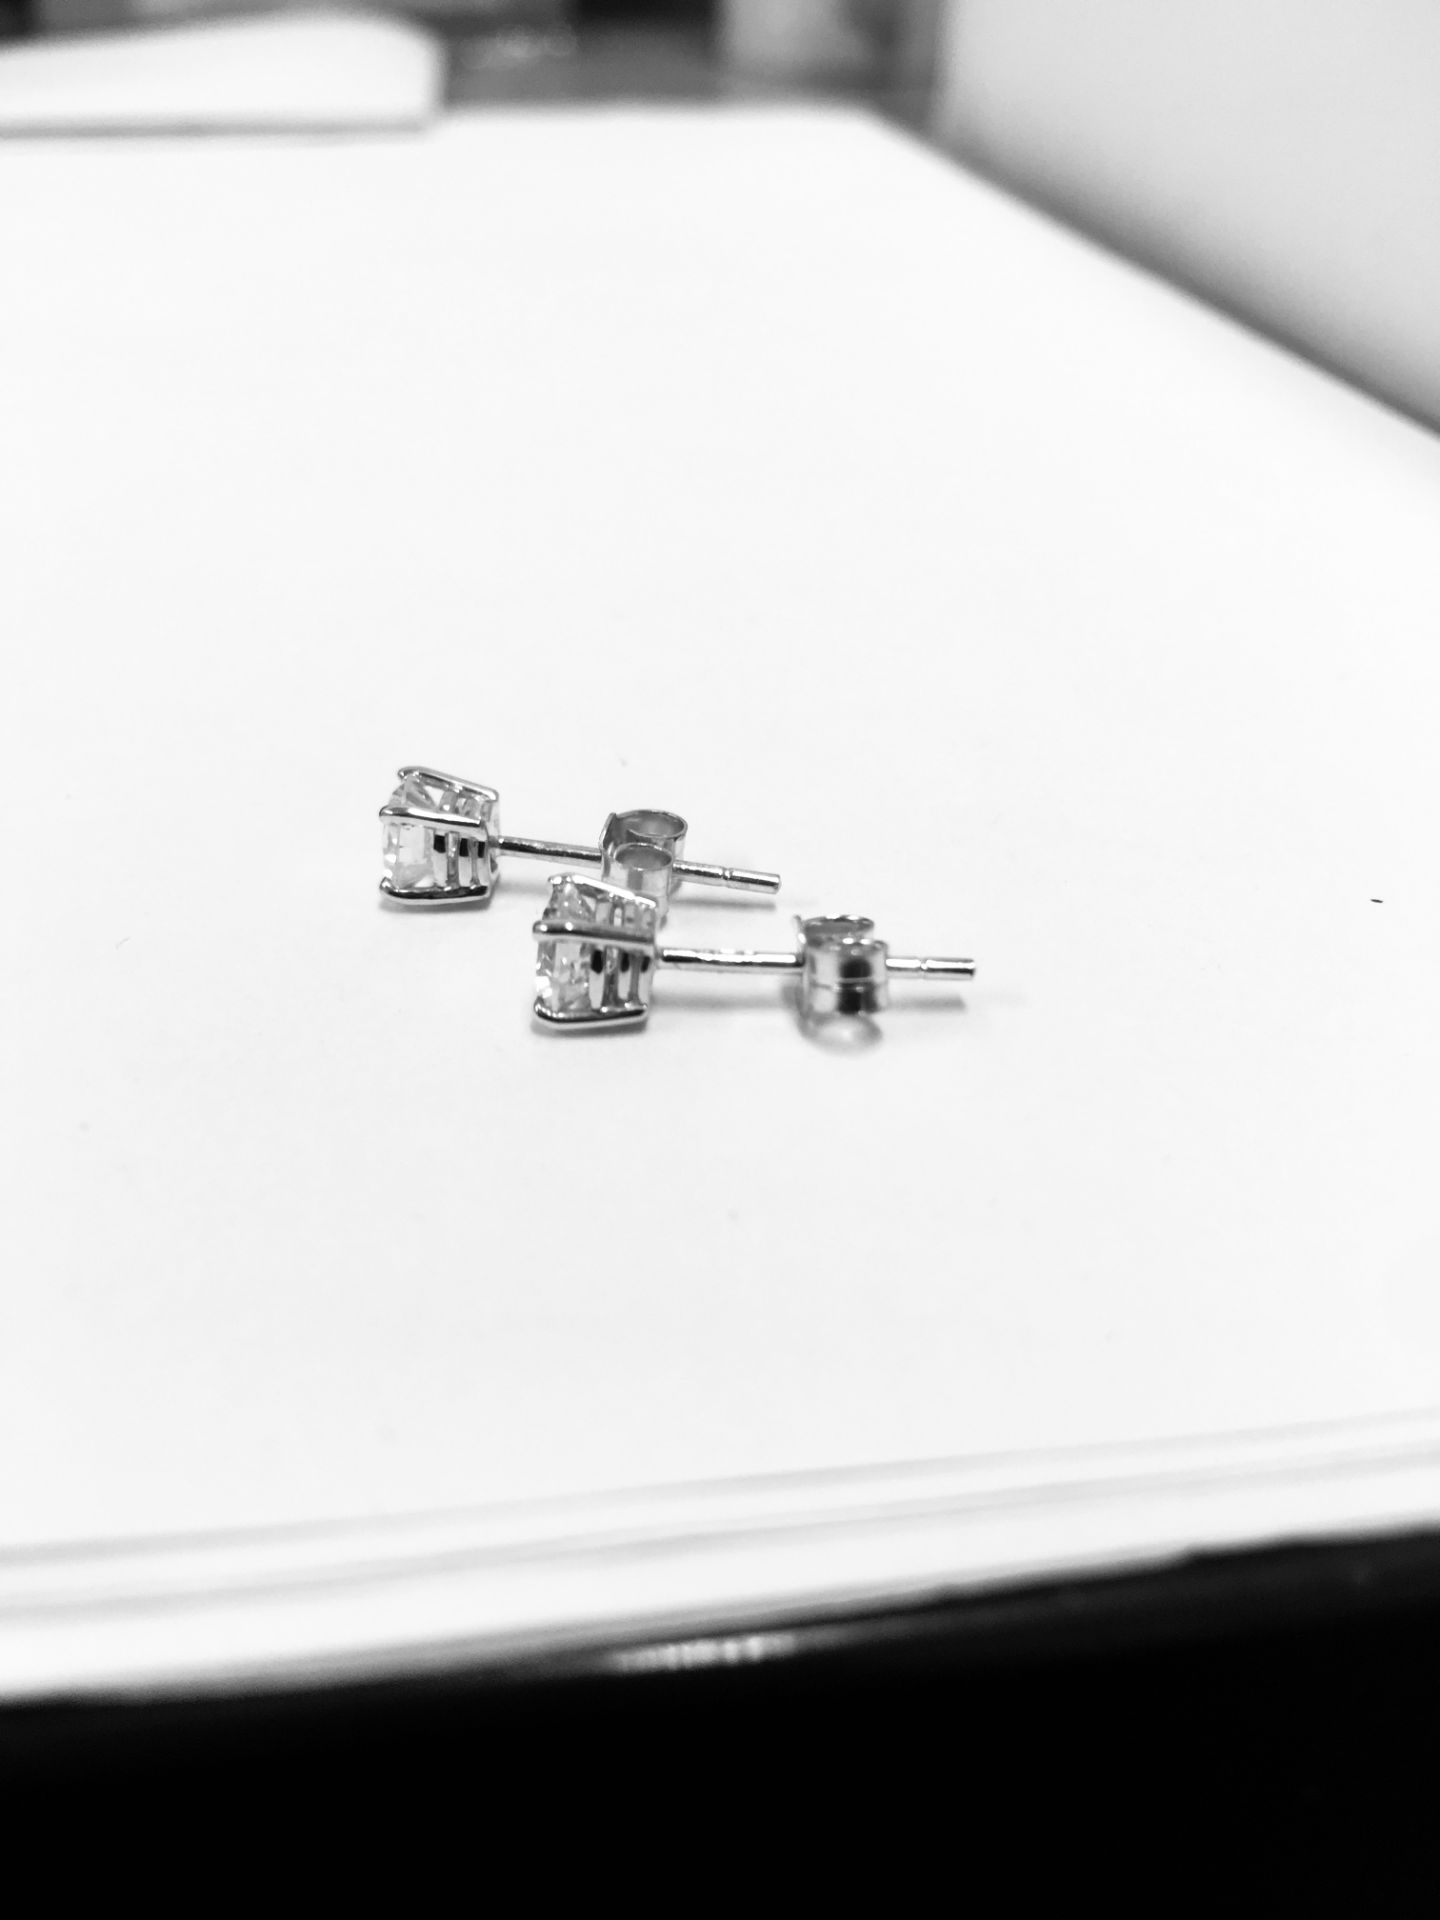 1ct diamond soliataire earrings2x0.50ct h colour vs grade diamonds ,18ct white gold 2gms uk made - Image 2 of 4